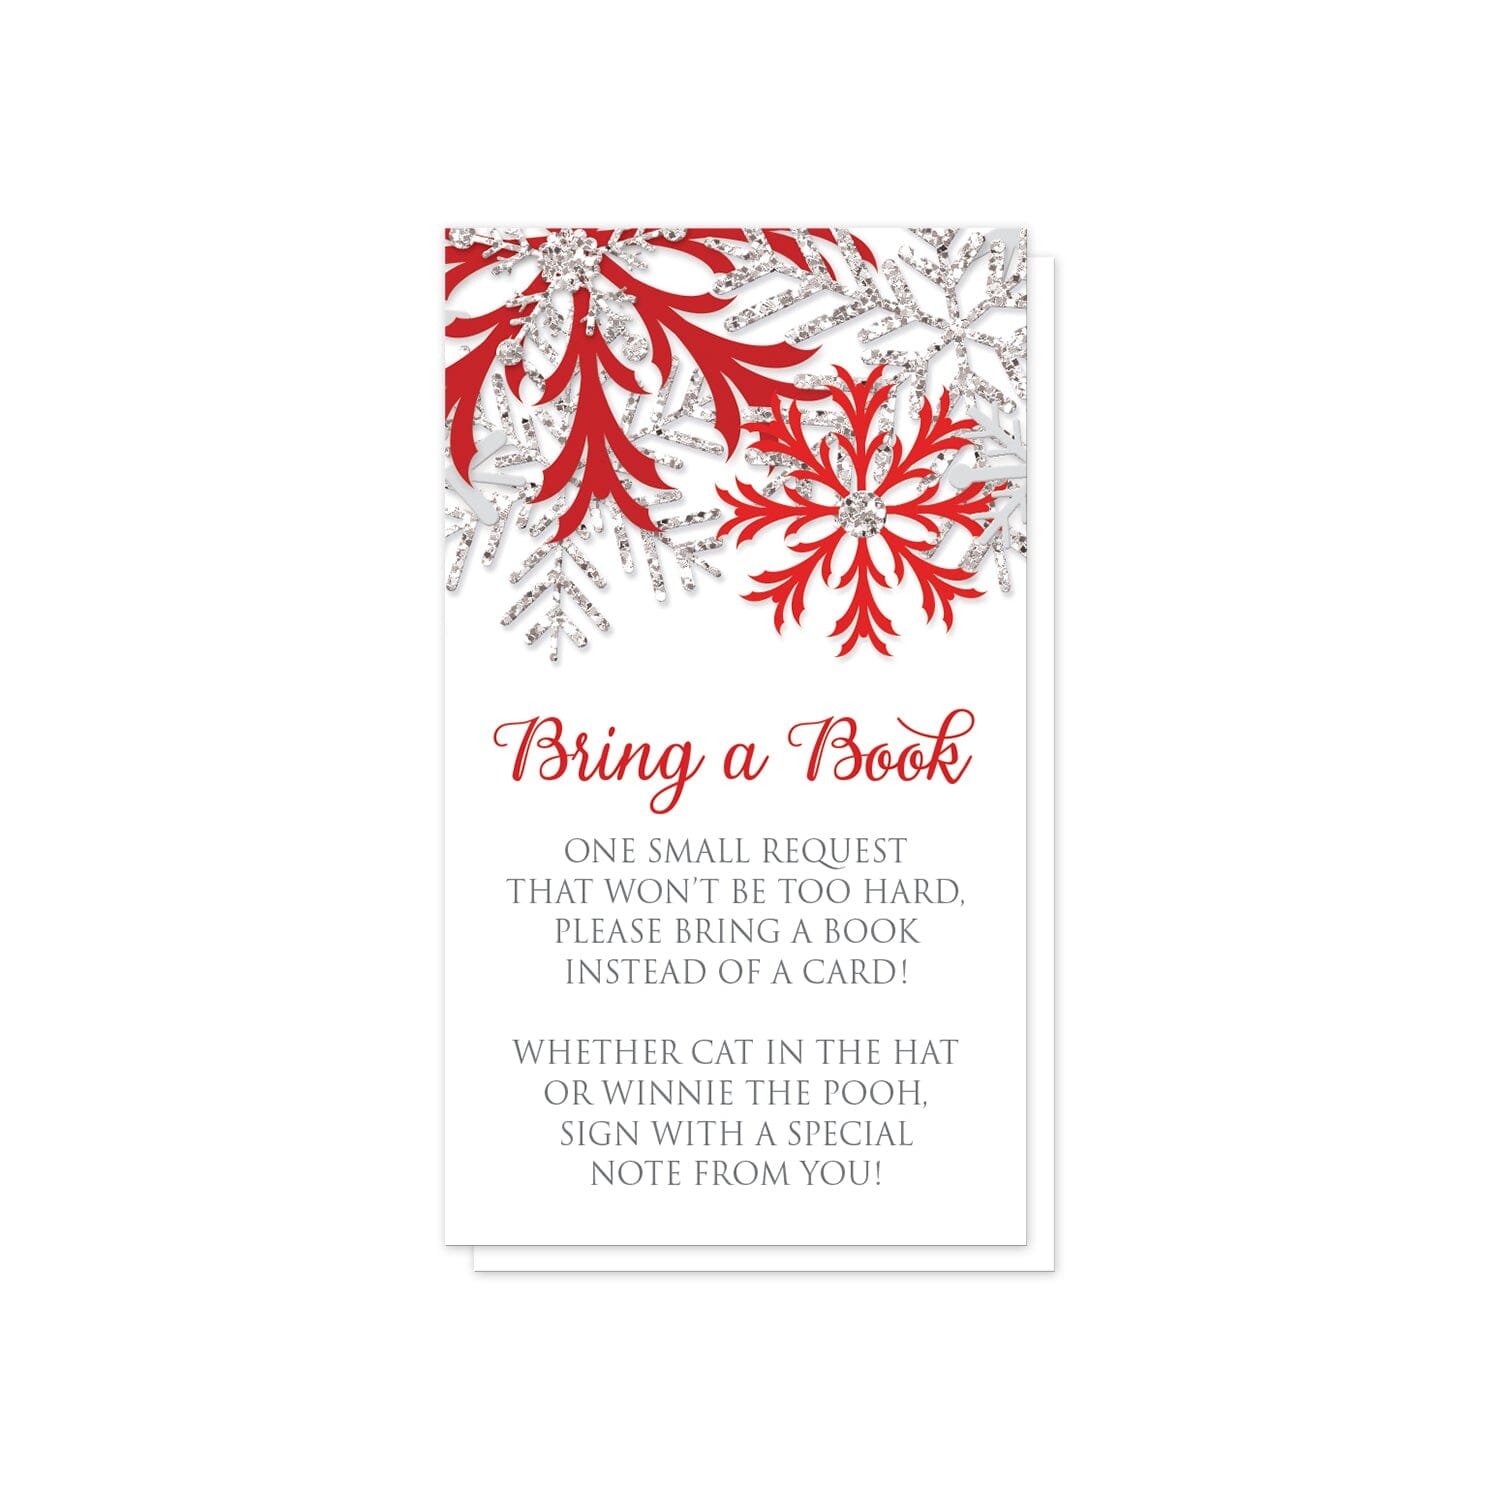 Winter Red Silver Snowflake Bring a Book Cards at Artistically Invited. Pretty winter red silver snowflake bring a book cards designed with red, darker red, and silver-colored glitter-illustrated snowflakes along the top. Your book request details are printed in red and gray over white below the snowflakes.